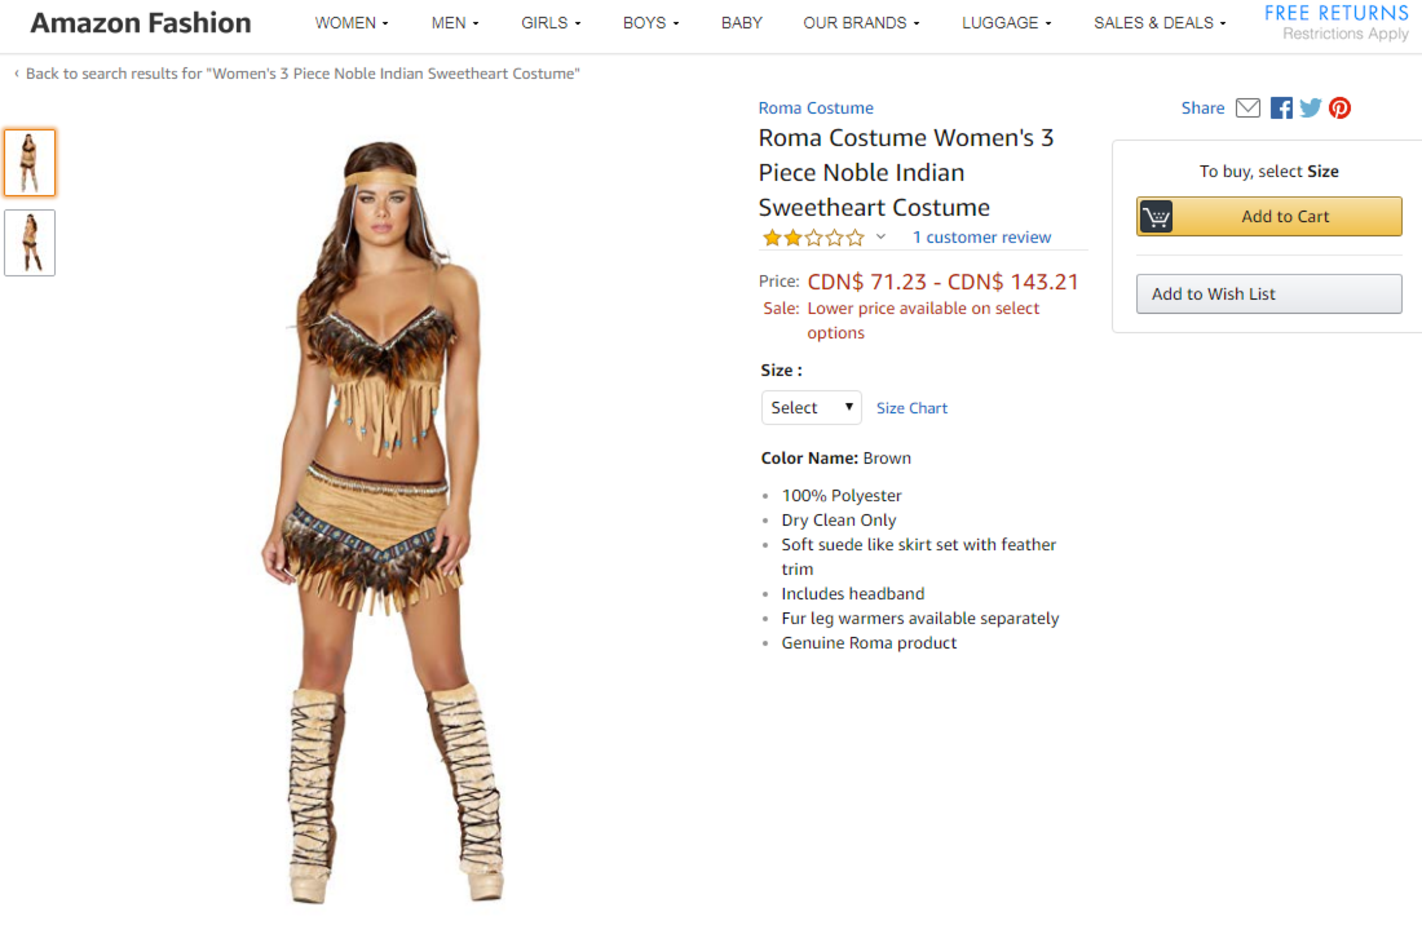 Indigenous costumes: it has to stop